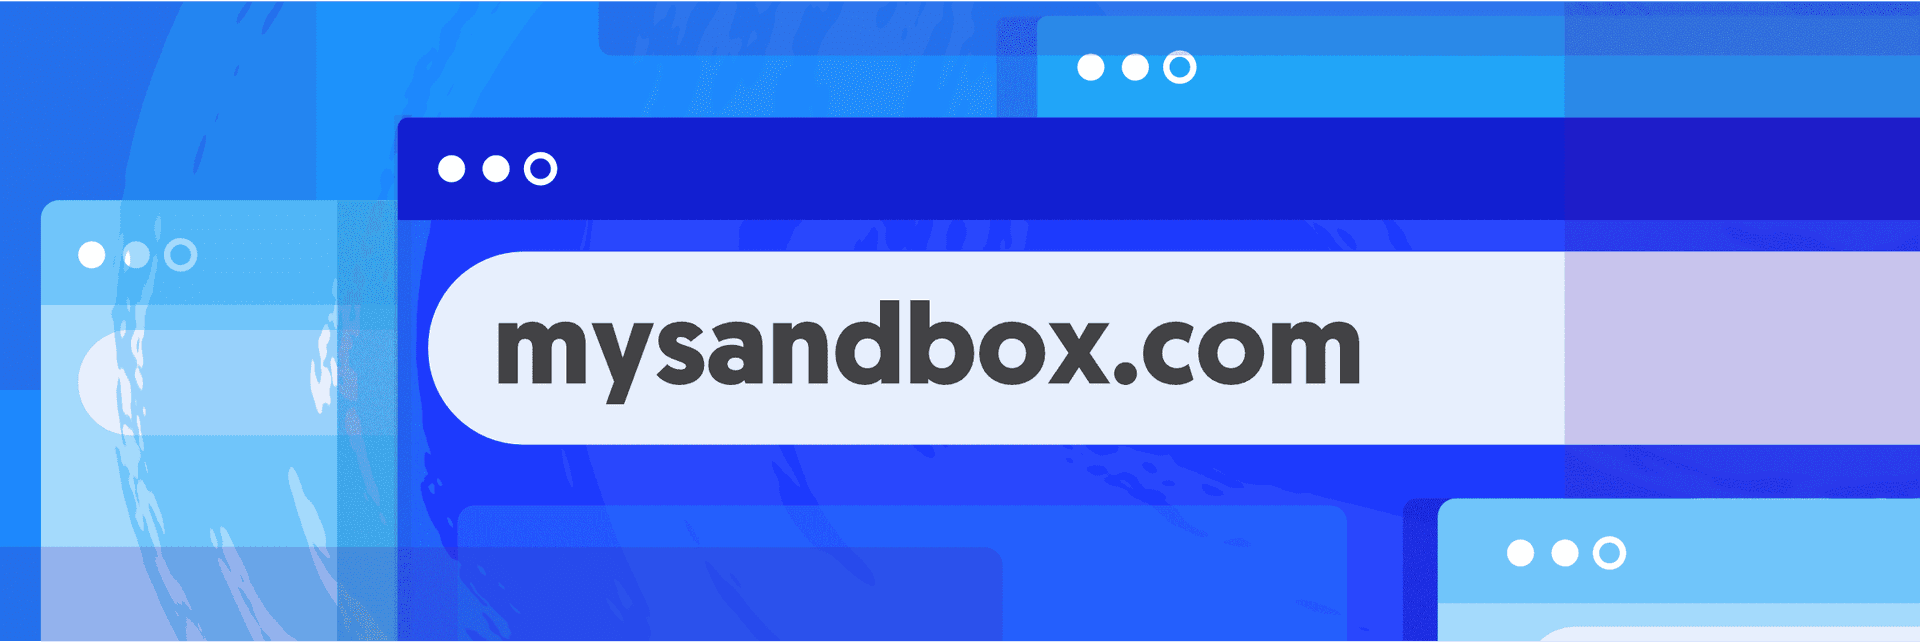 New feature: Custom domains for Sandboxes